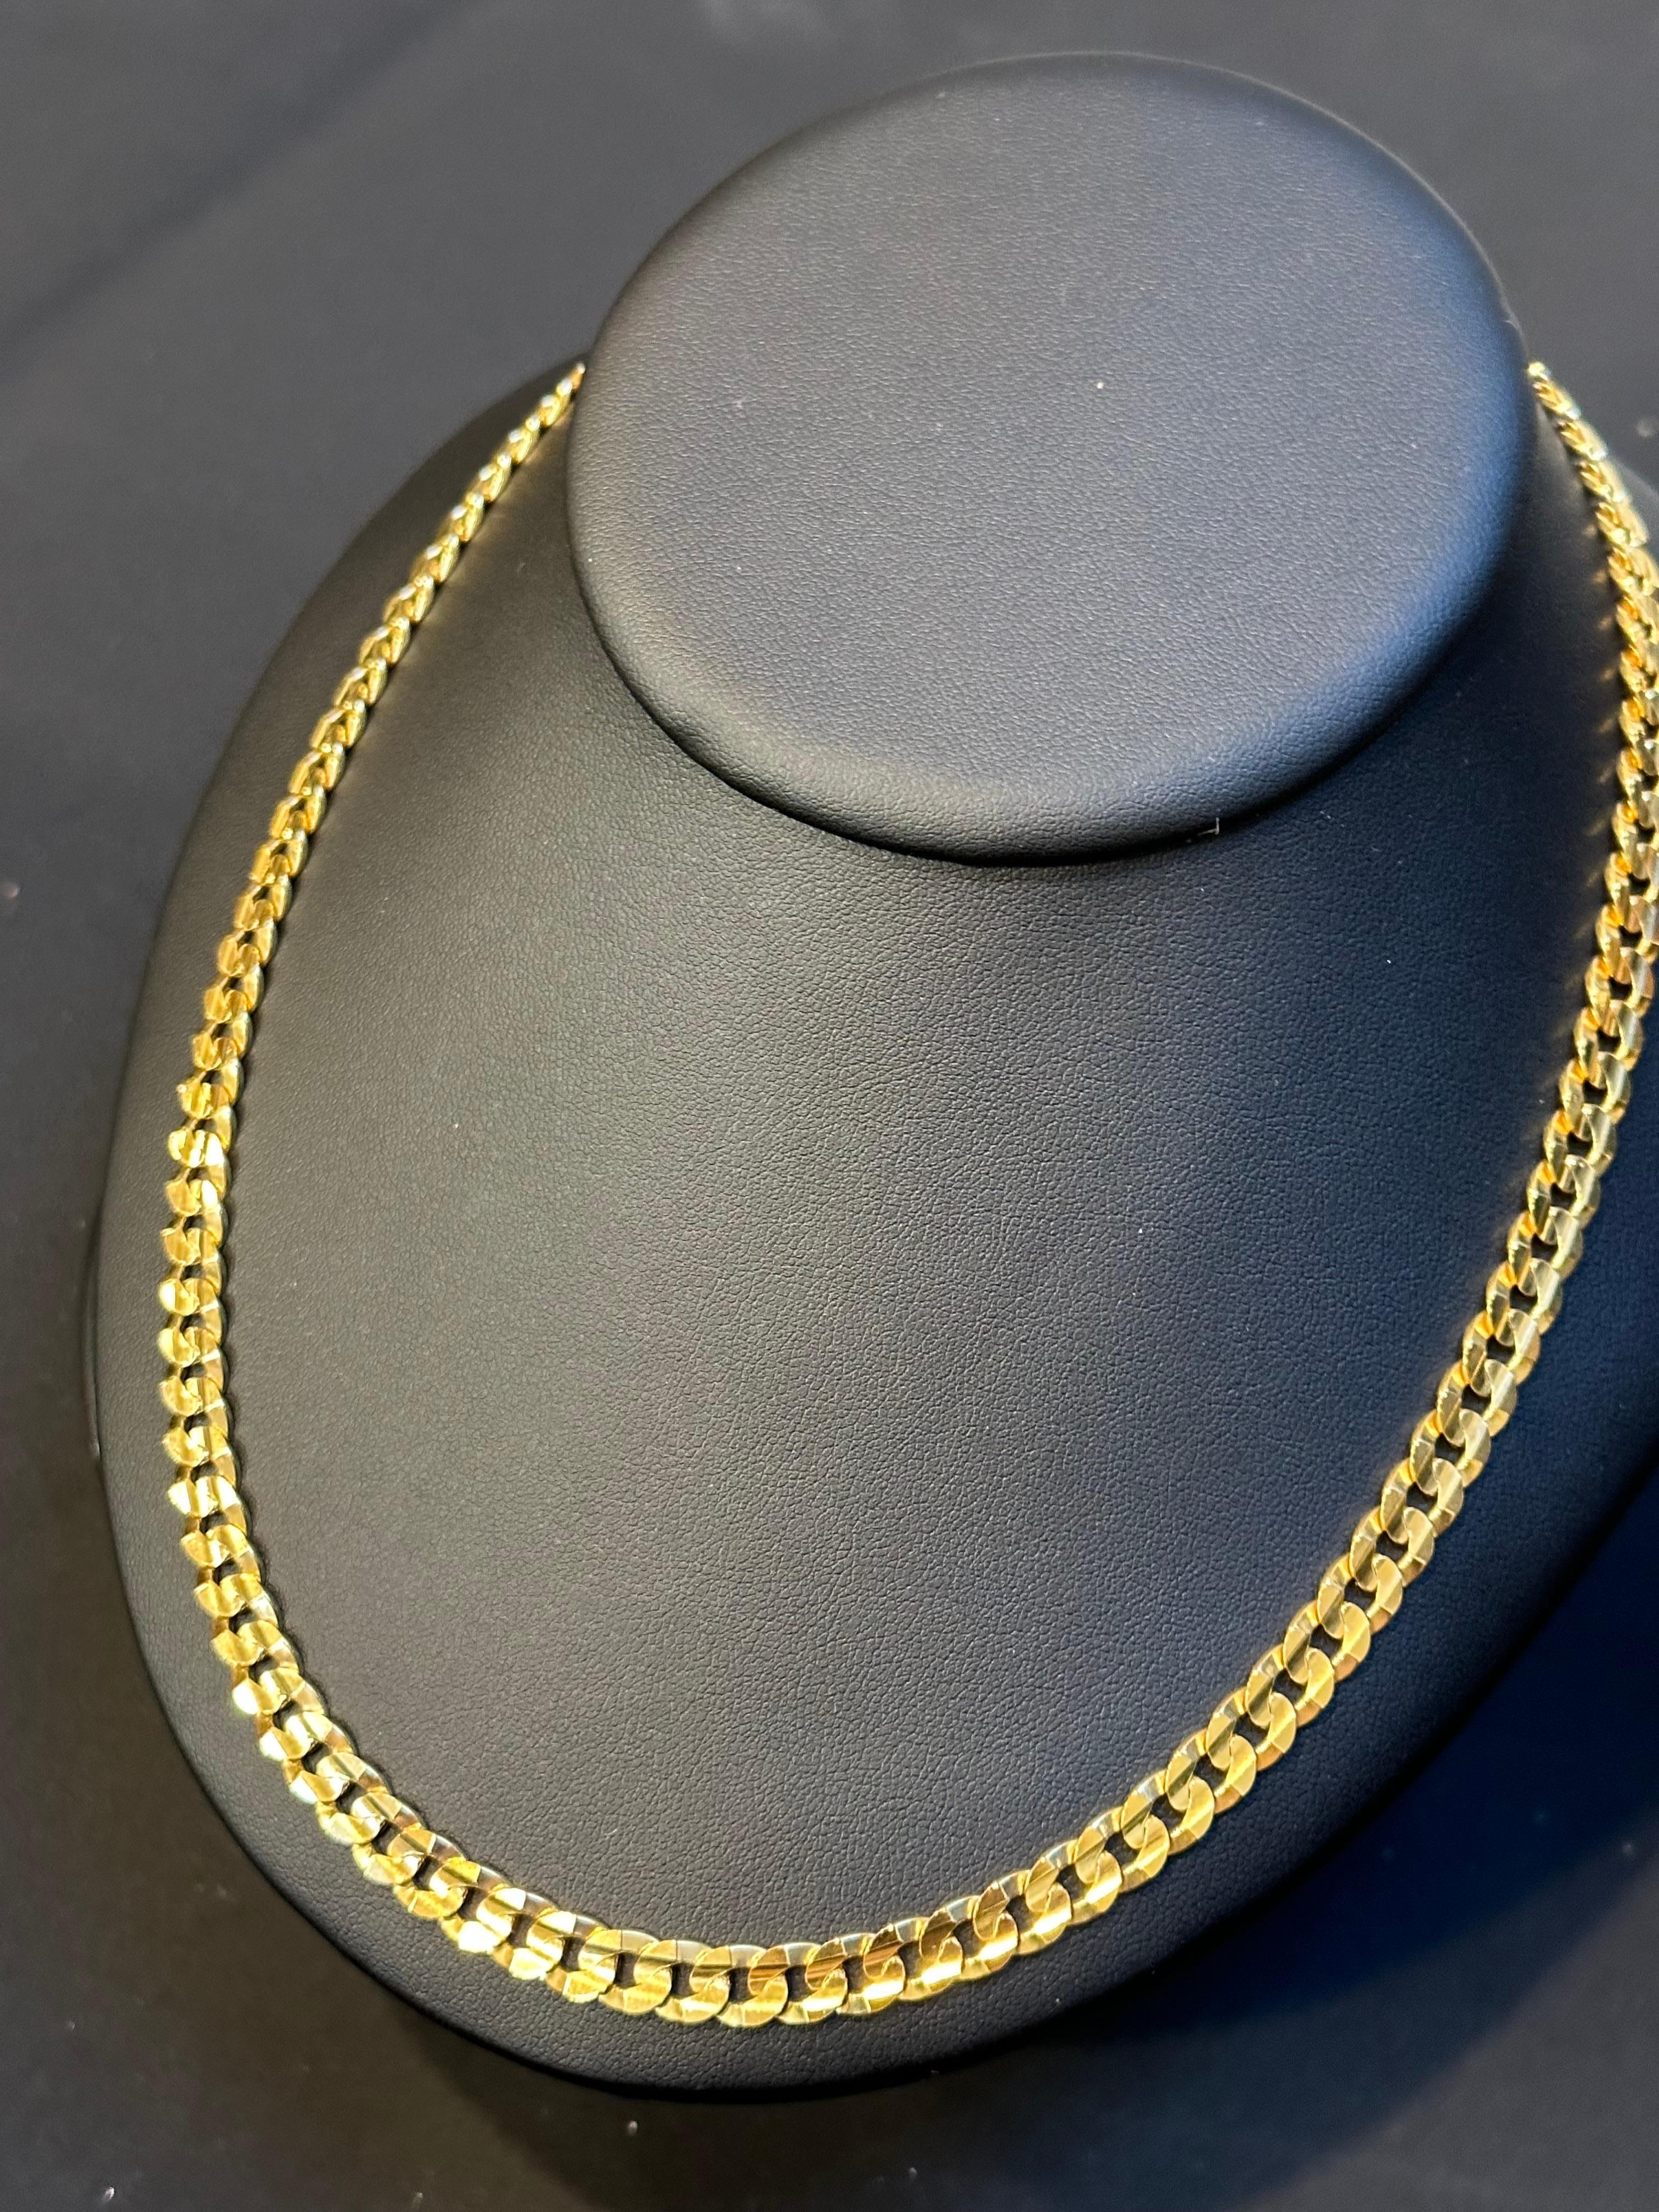 For those in search of high-quality, authentic gold jewelry, this Vintage 14 Kt Yellow Gold Cuban link chain is a must-see. Made from solid 14K gold, this chain is both durable and luxurious, with a weight of 40.6 grams.
It is 8 mm wide 

Crafted in